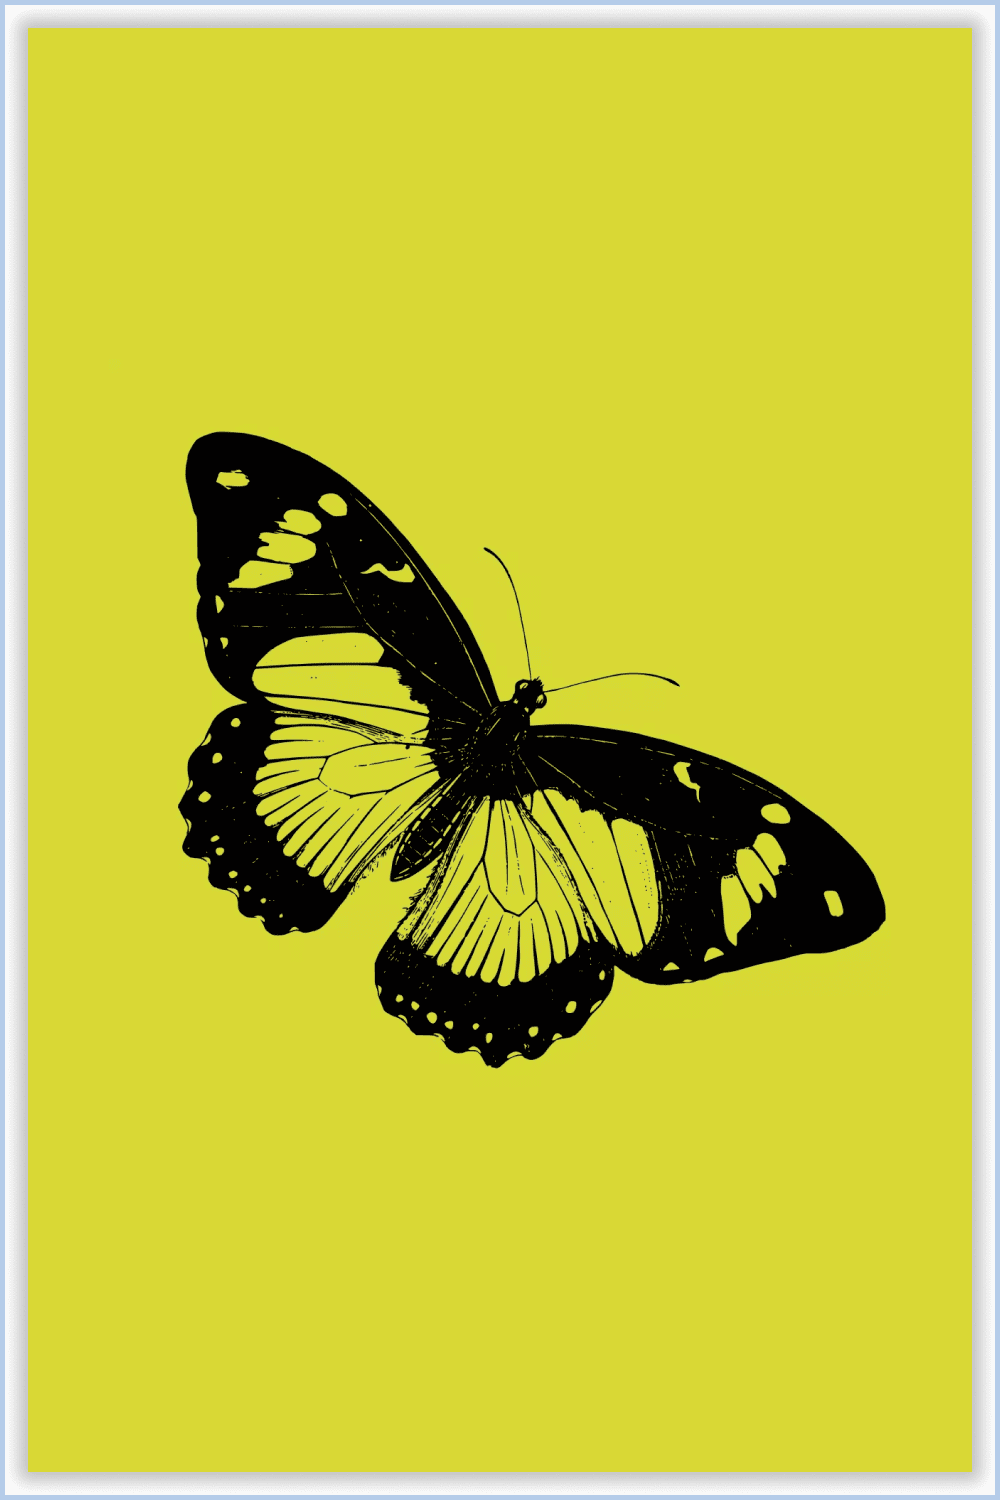 Image of a well-drawn black butterfly on a yellow background.